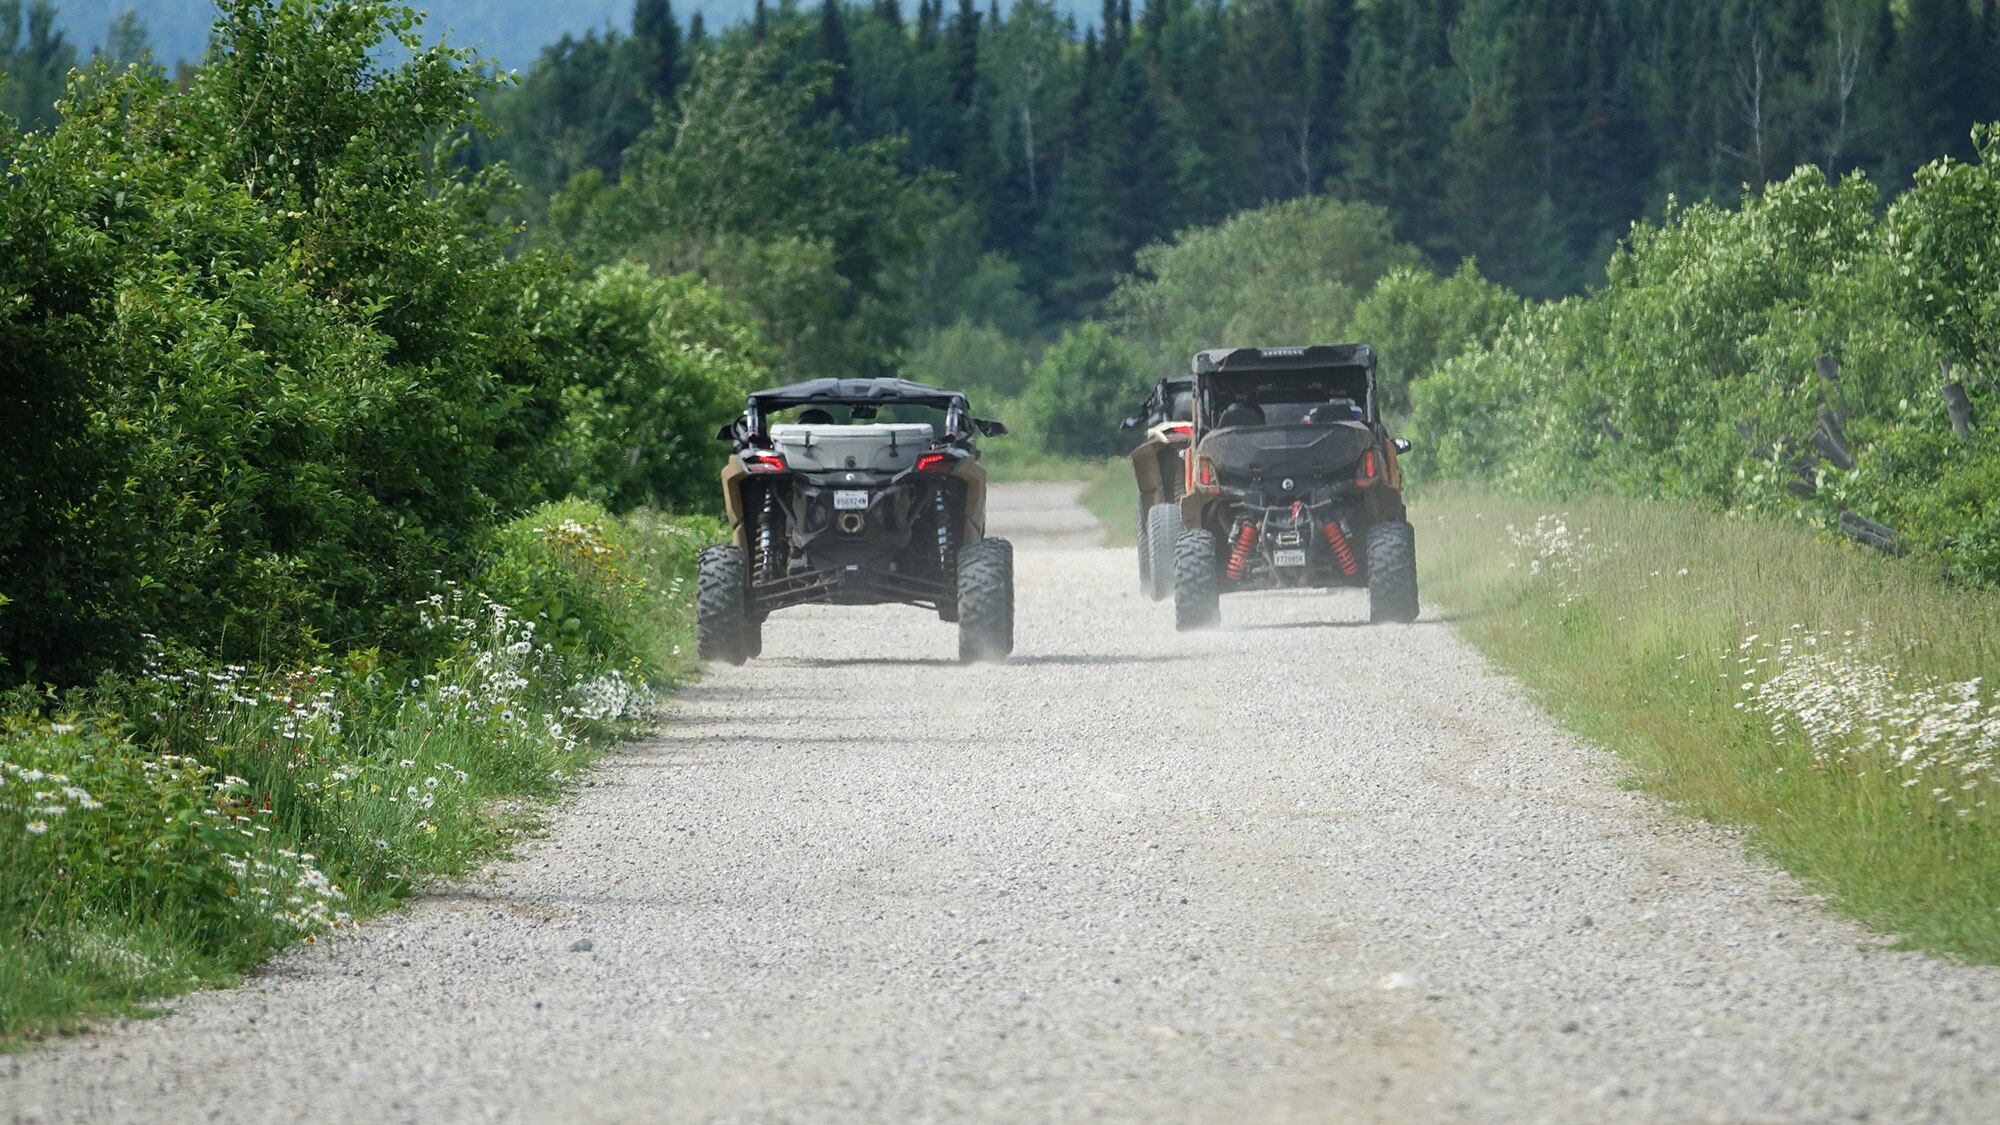 Two side by side vehicles riding on a gravel road